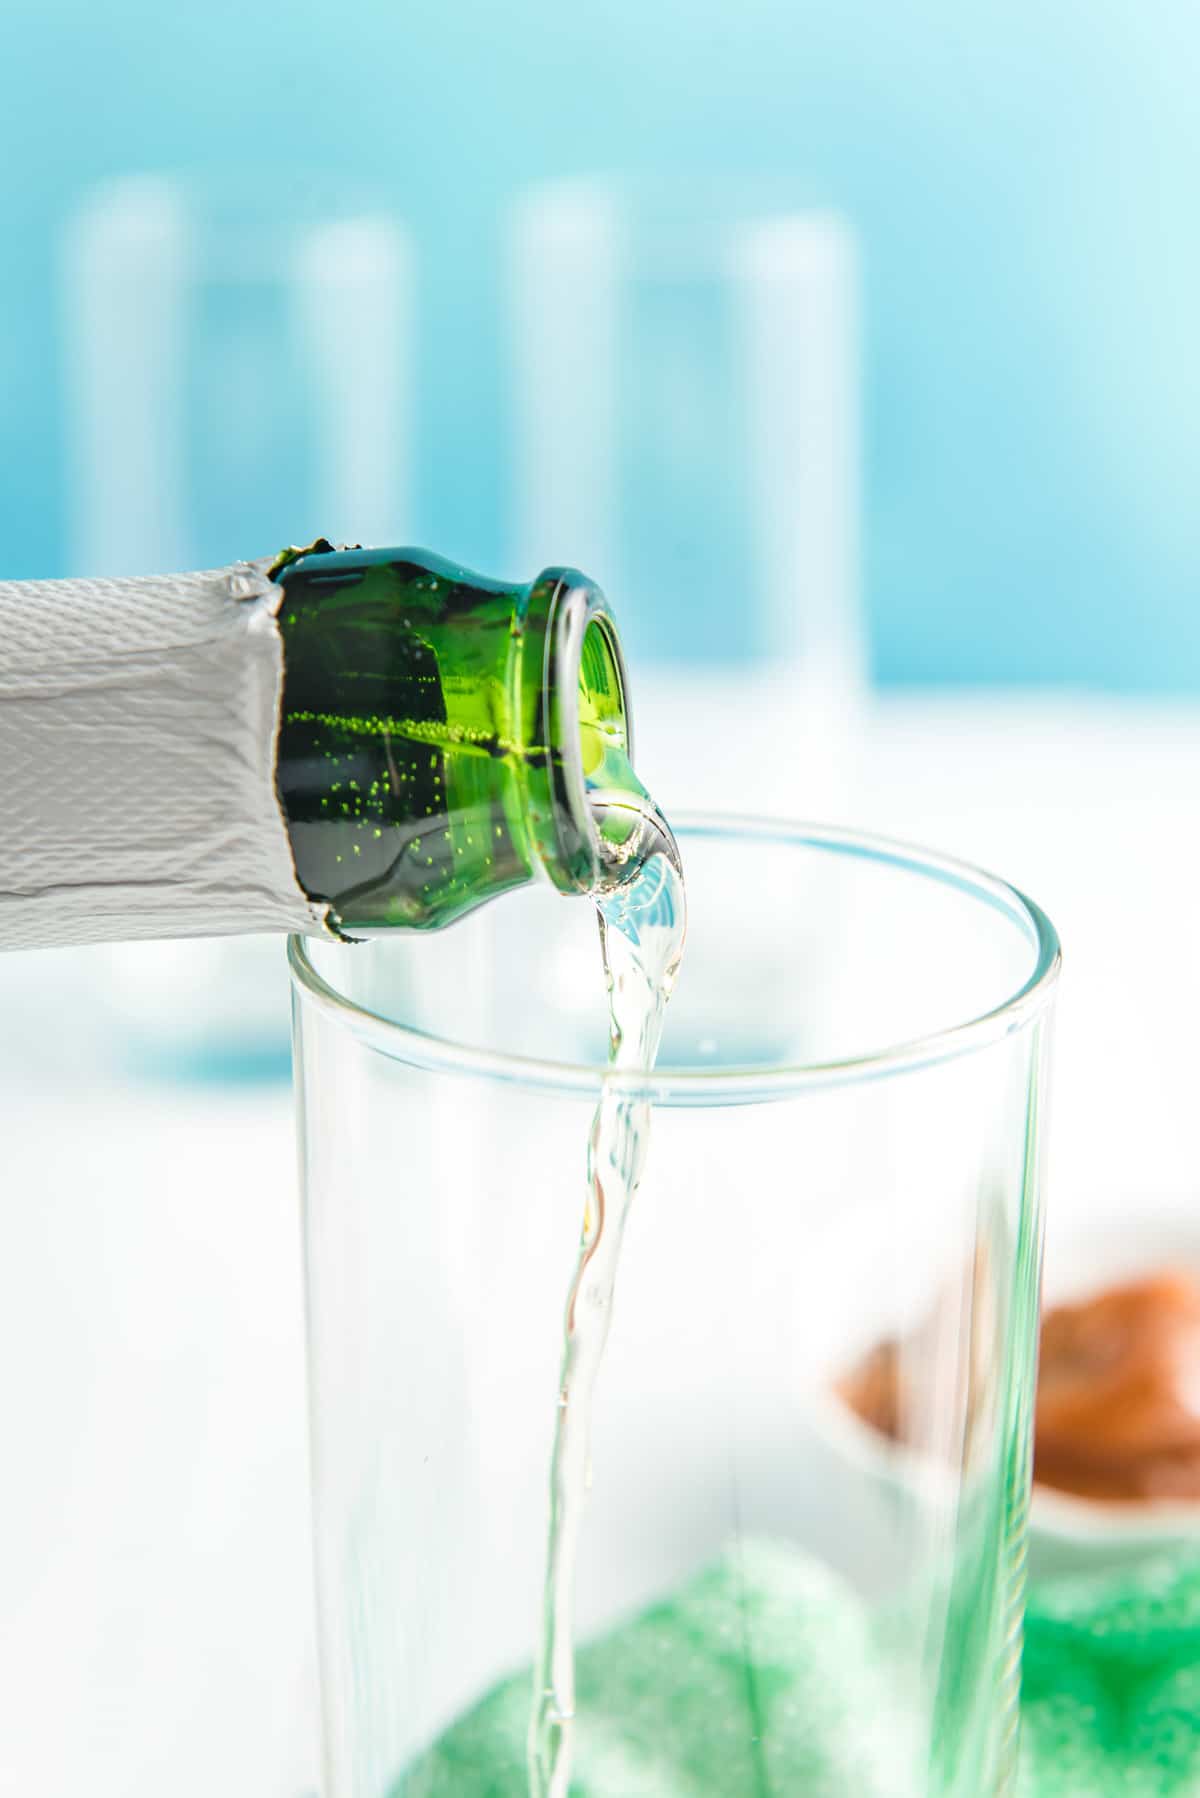 Sparkling cider being poured into a glass